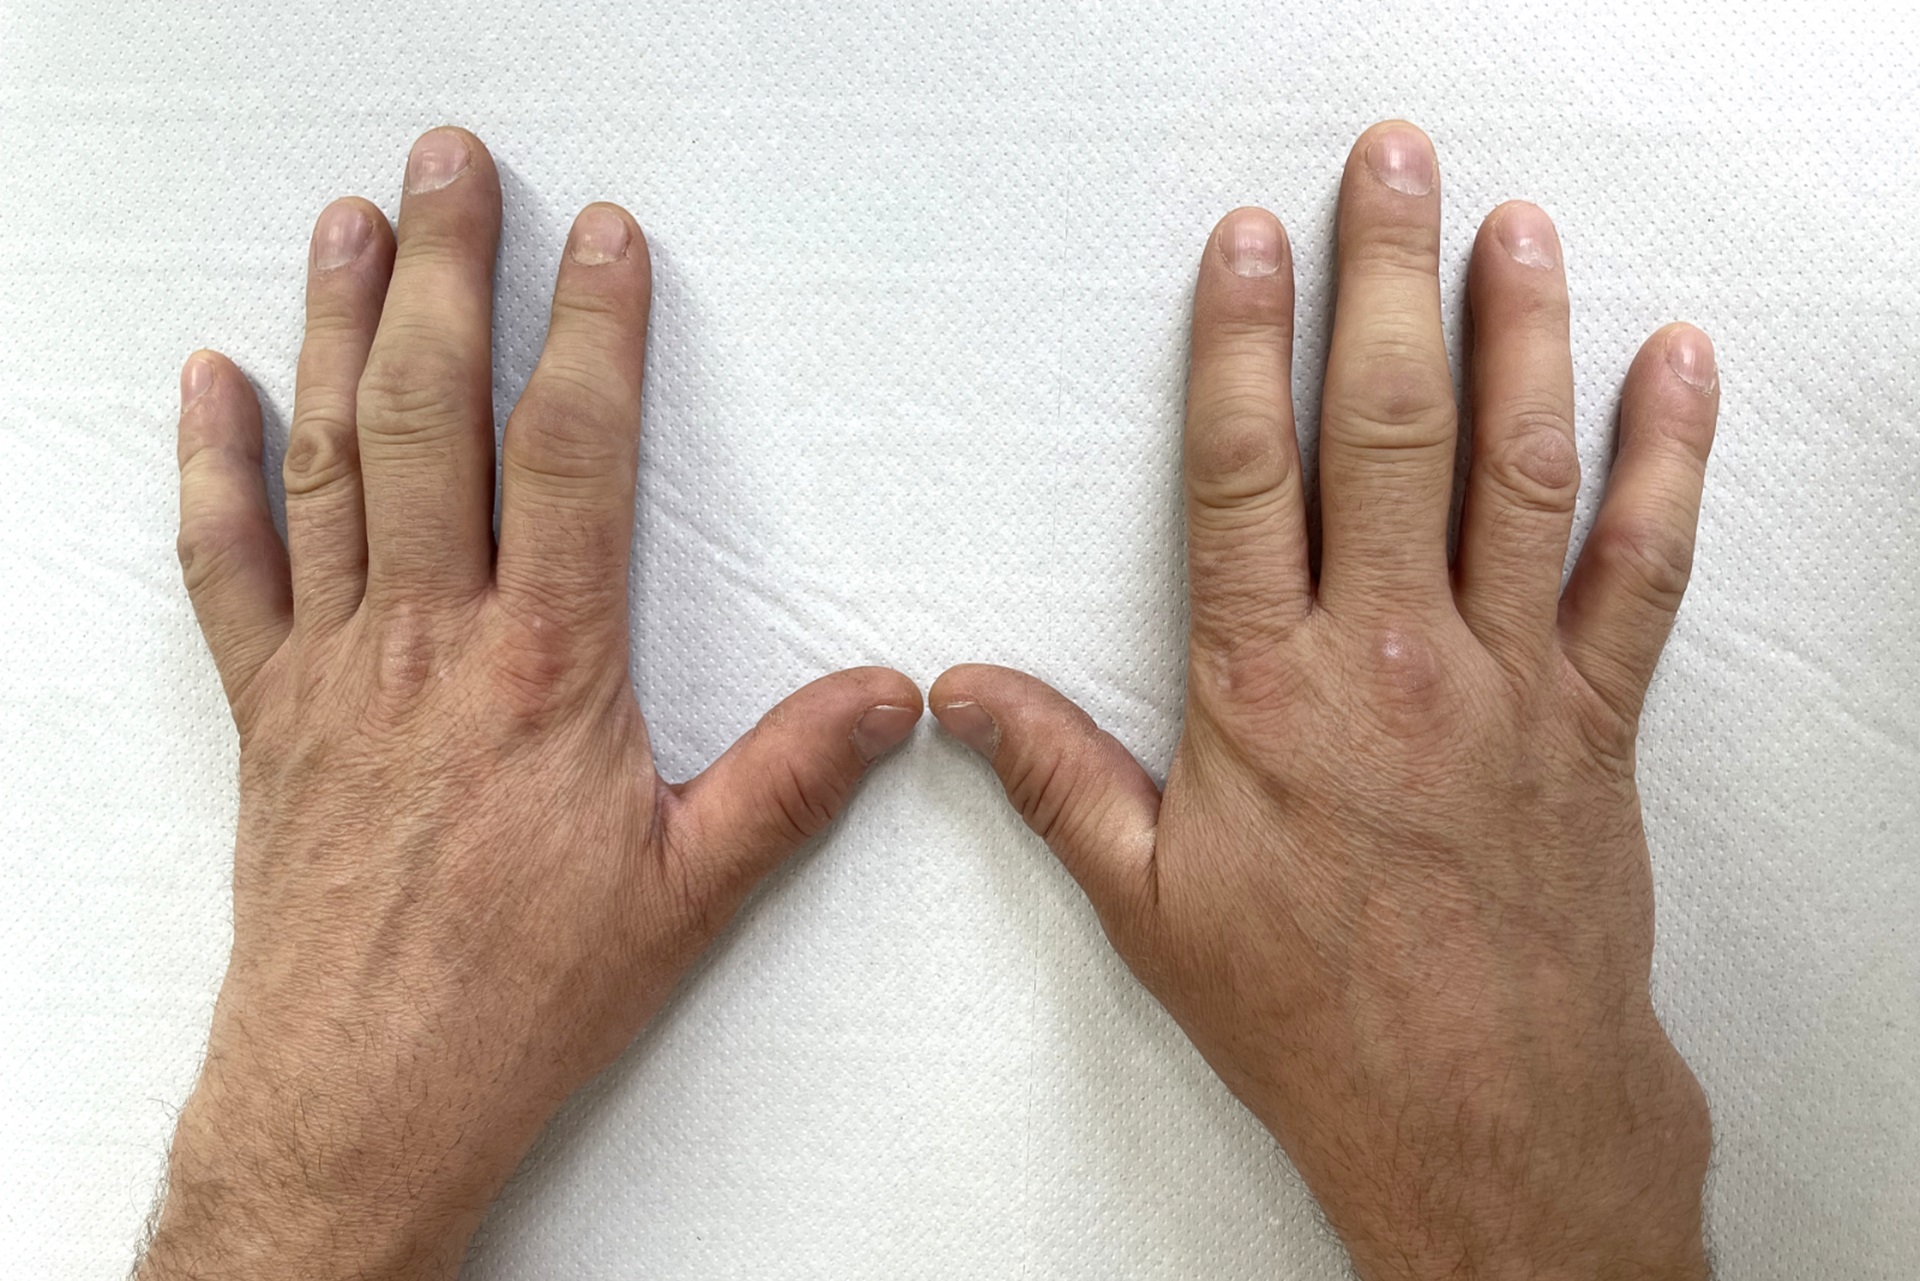 Diet and Nutrition of patients having Rheumatoid hand surgery in Aberdeen, uk by Dr Jamil Ahmed